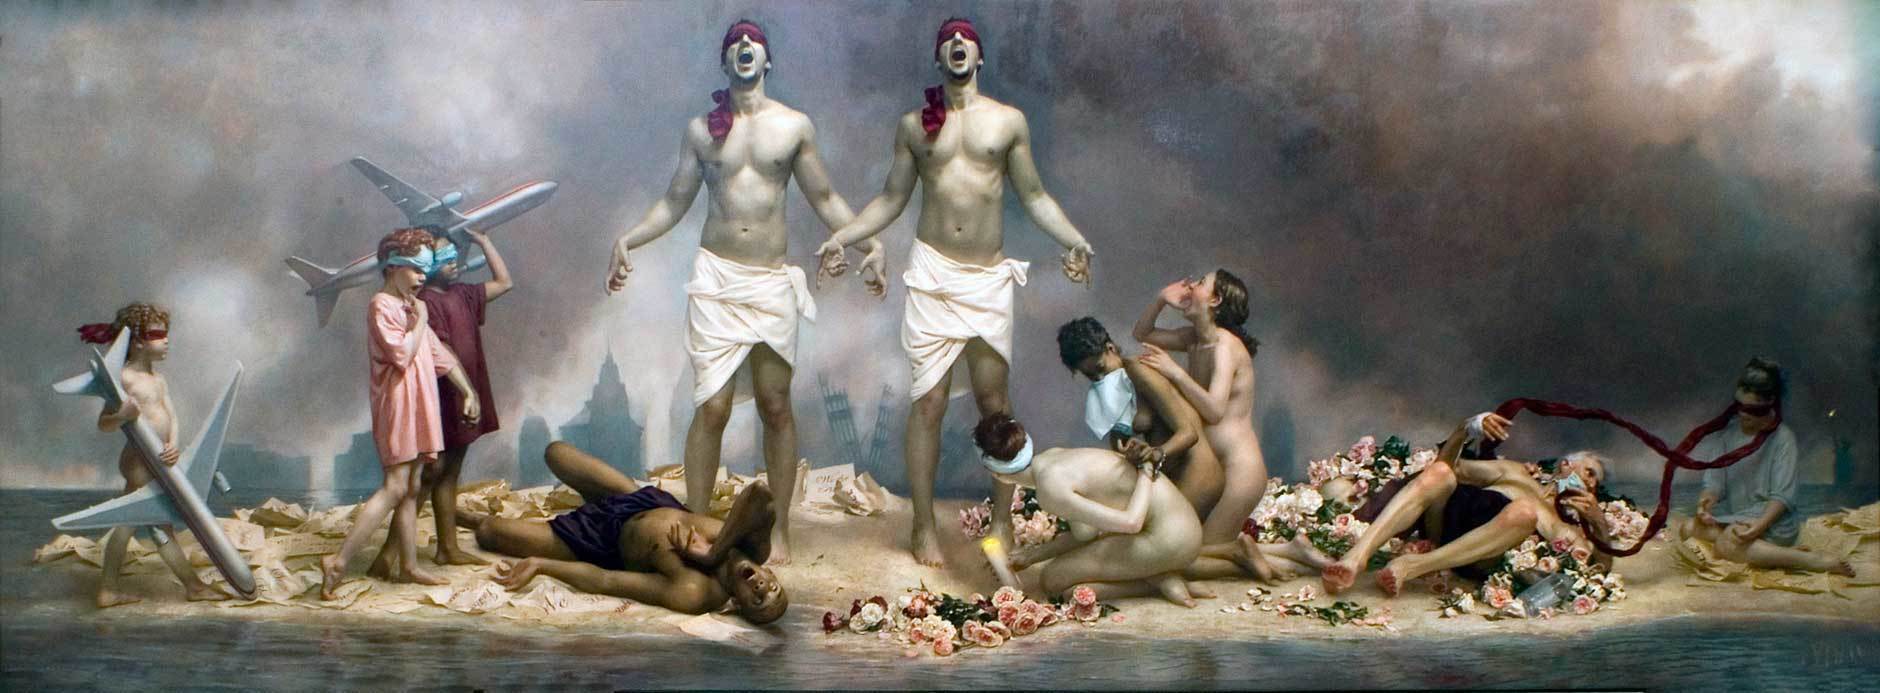 Graydon Parrish, <i>The Cycle of Terror and Tragedy</i>, Oil on Canvas, 76 x 210 in., Charles F. Smith Fund and in memory of Scott O’Brien who died in the World Trade Center, given by his family